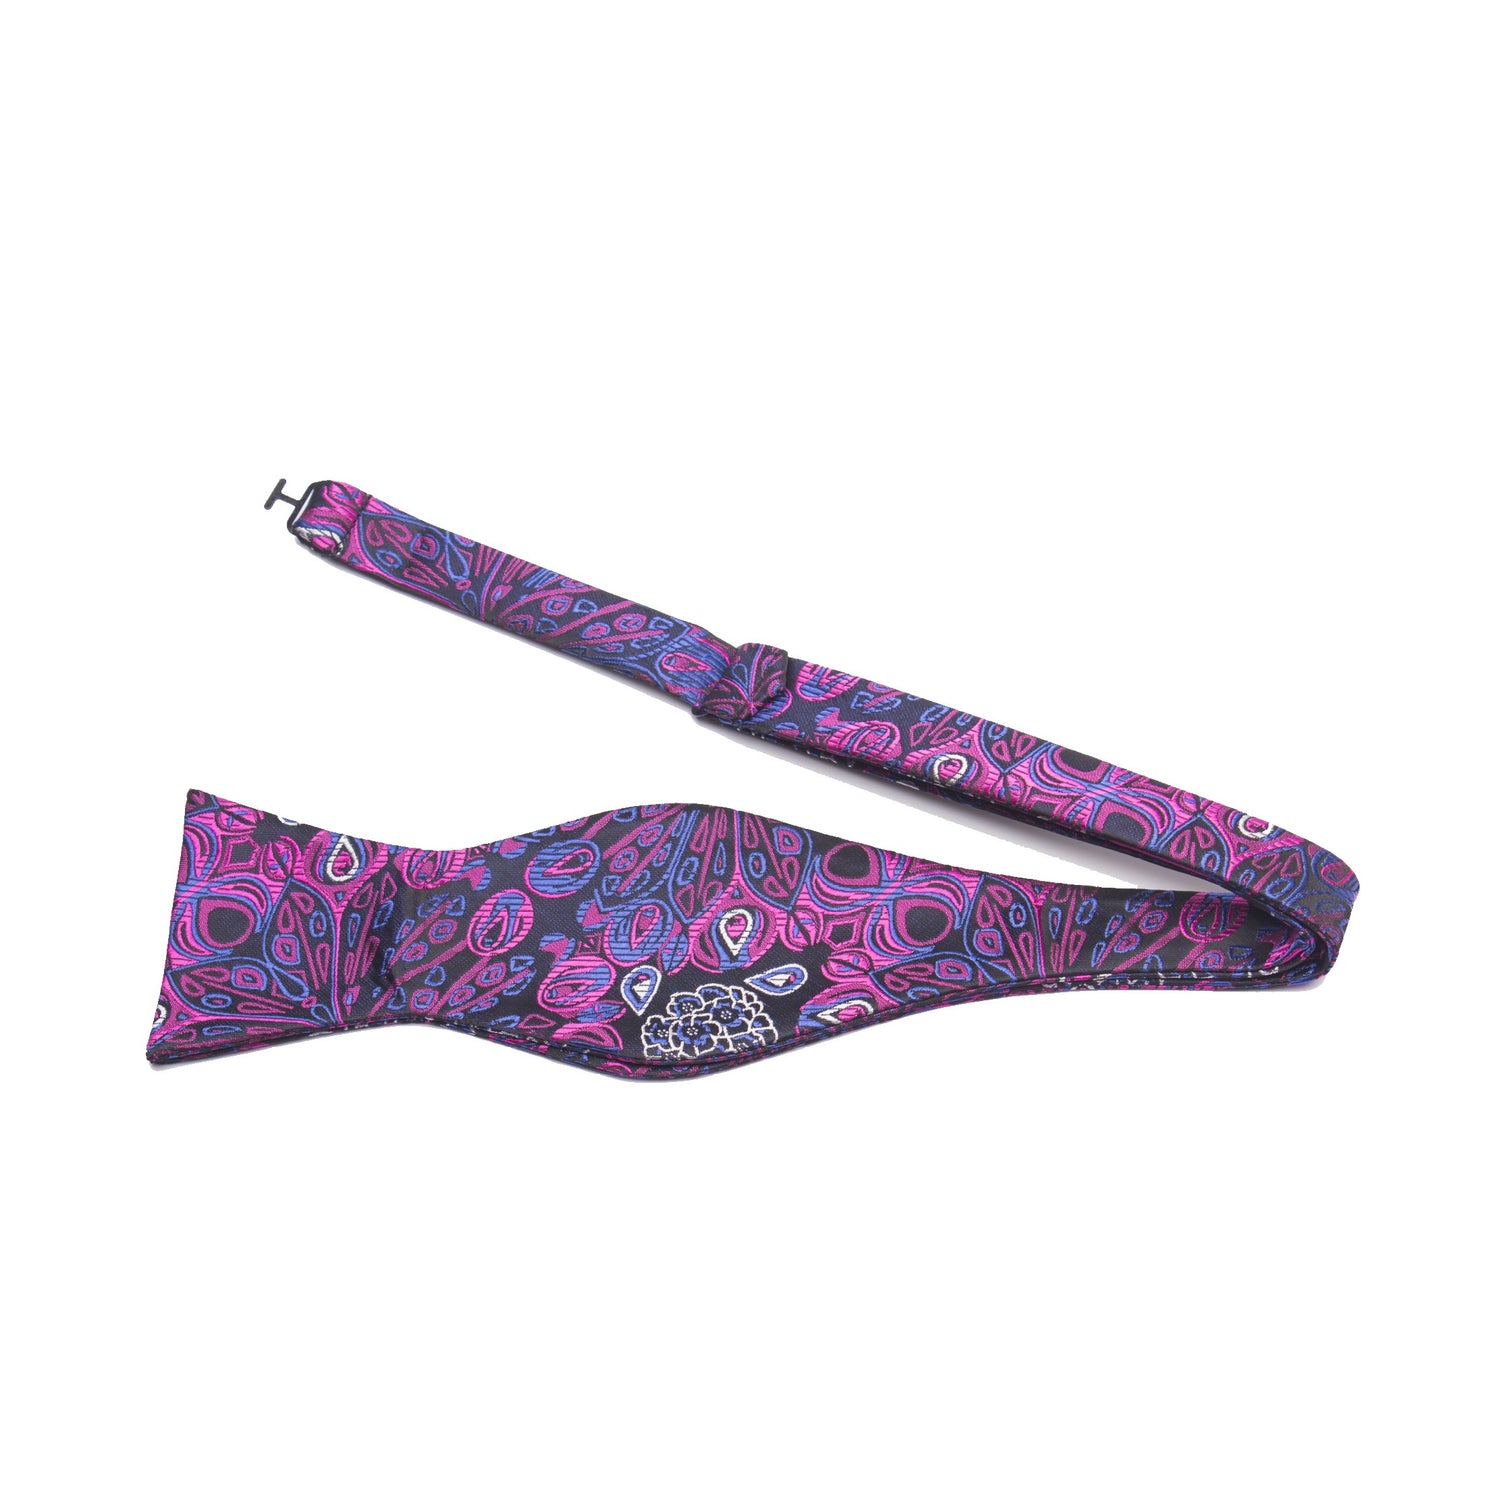 A Purple, Blue Abstract Peacock Feather Pattern Silk Self Tie Bow Tie Untied